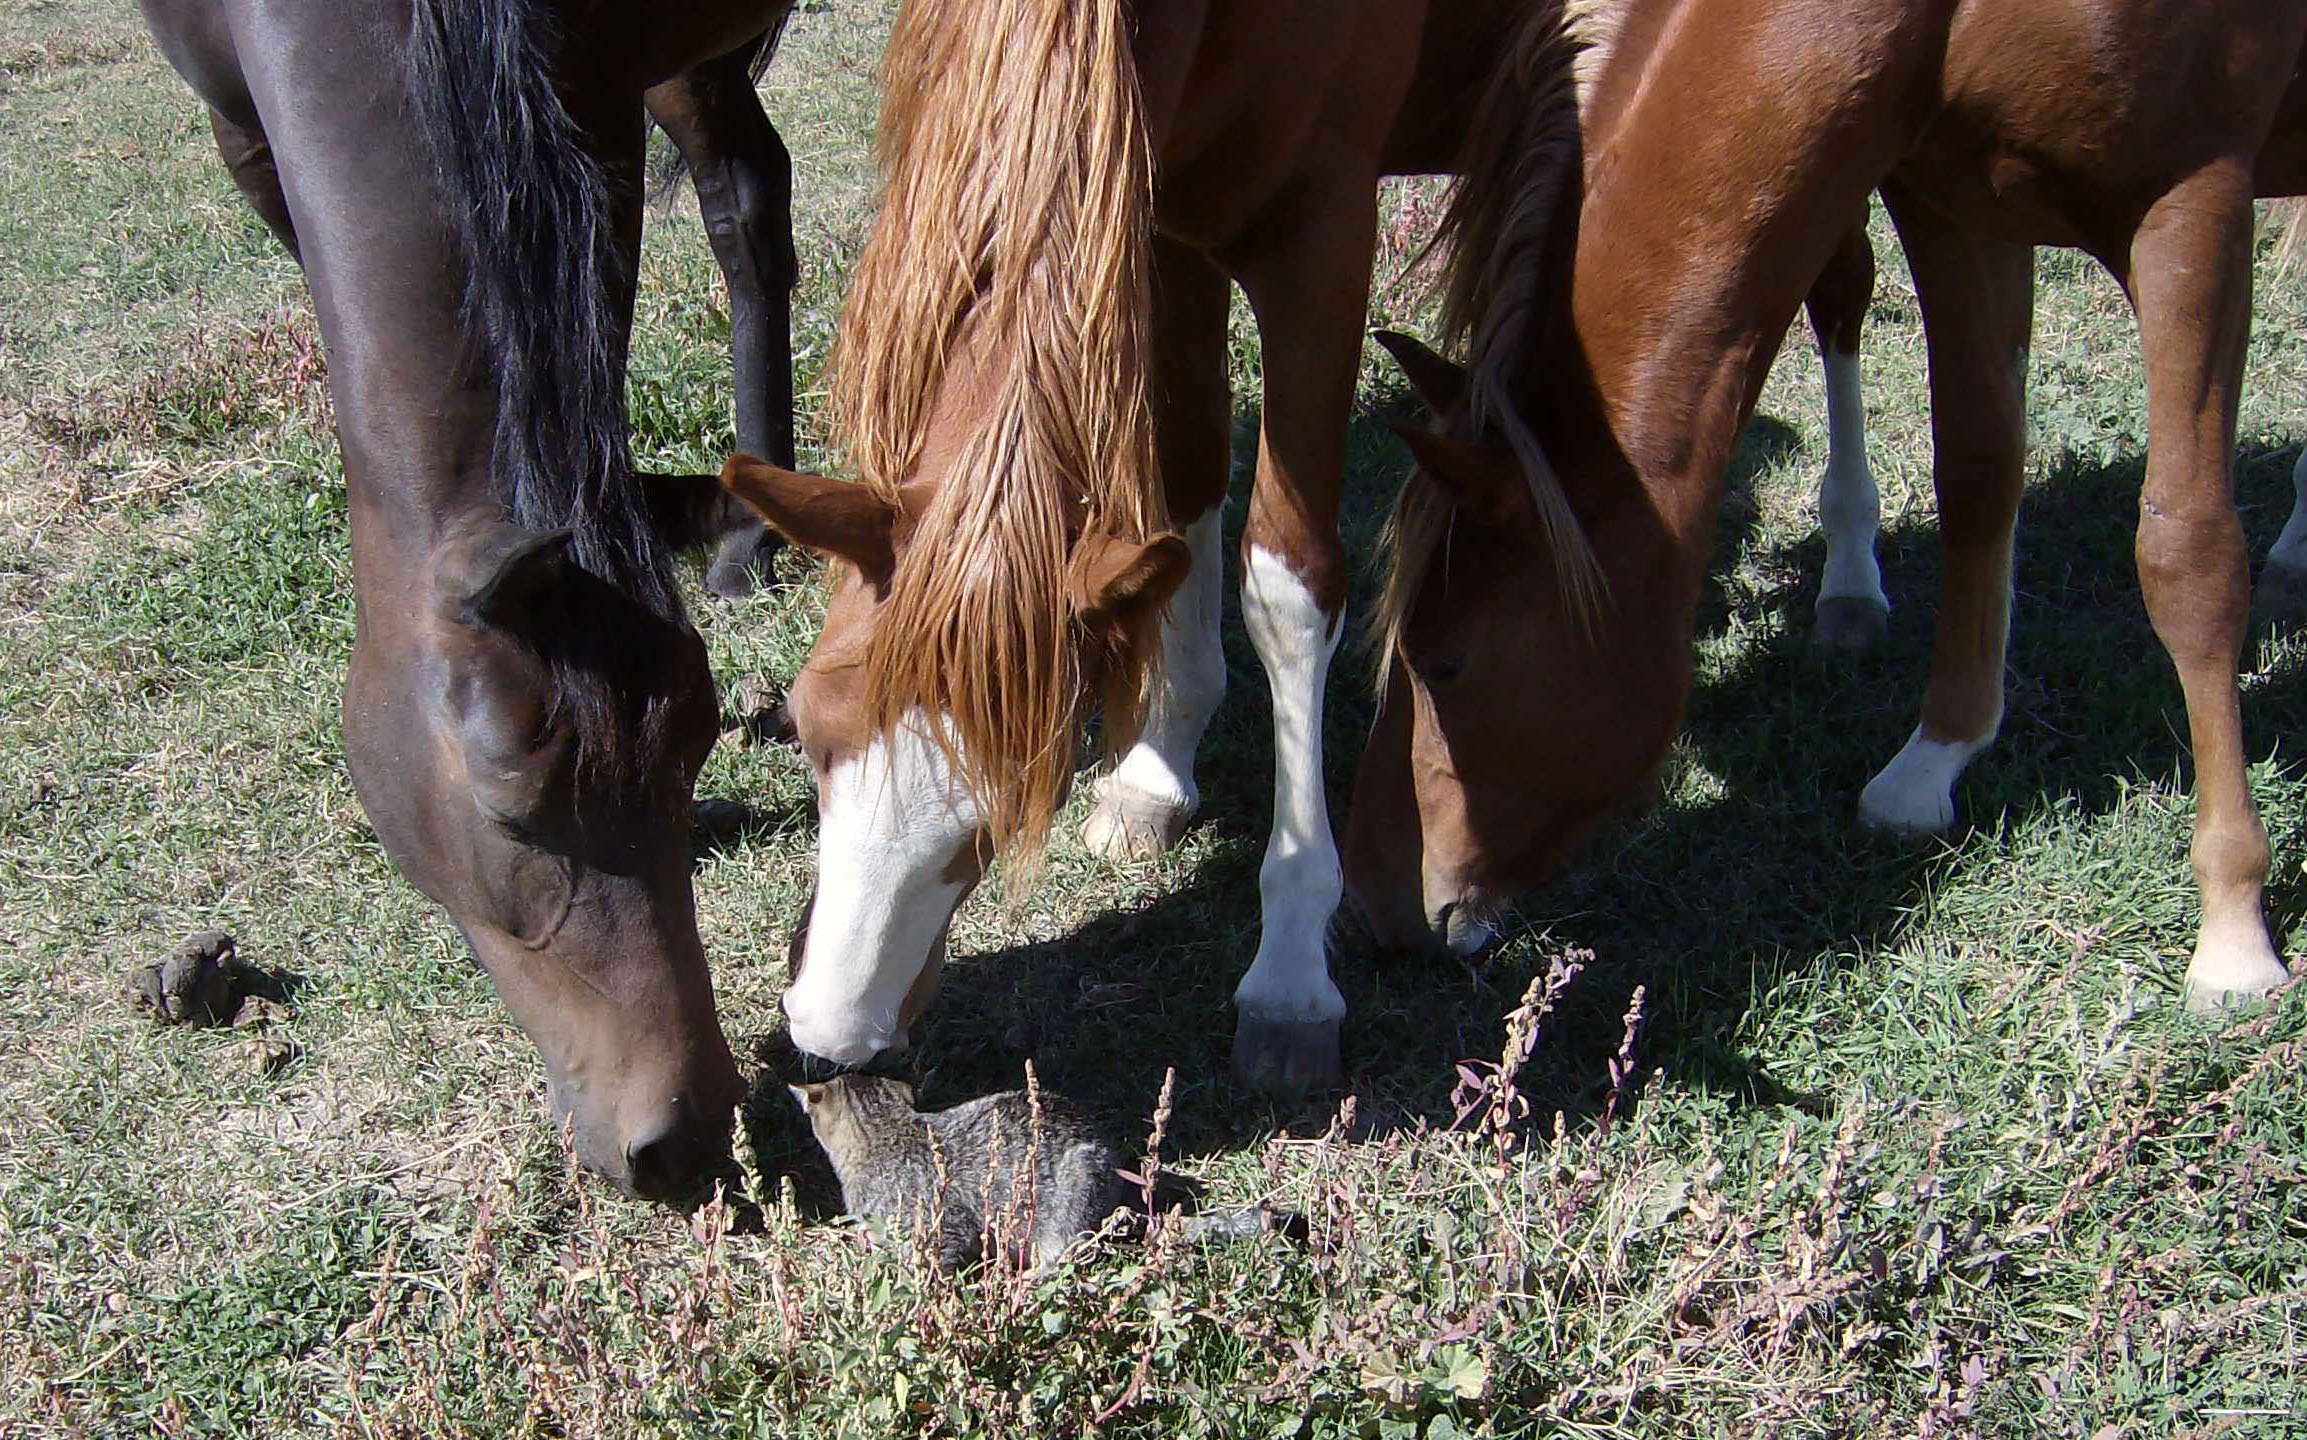 Young horses smell the cat photo